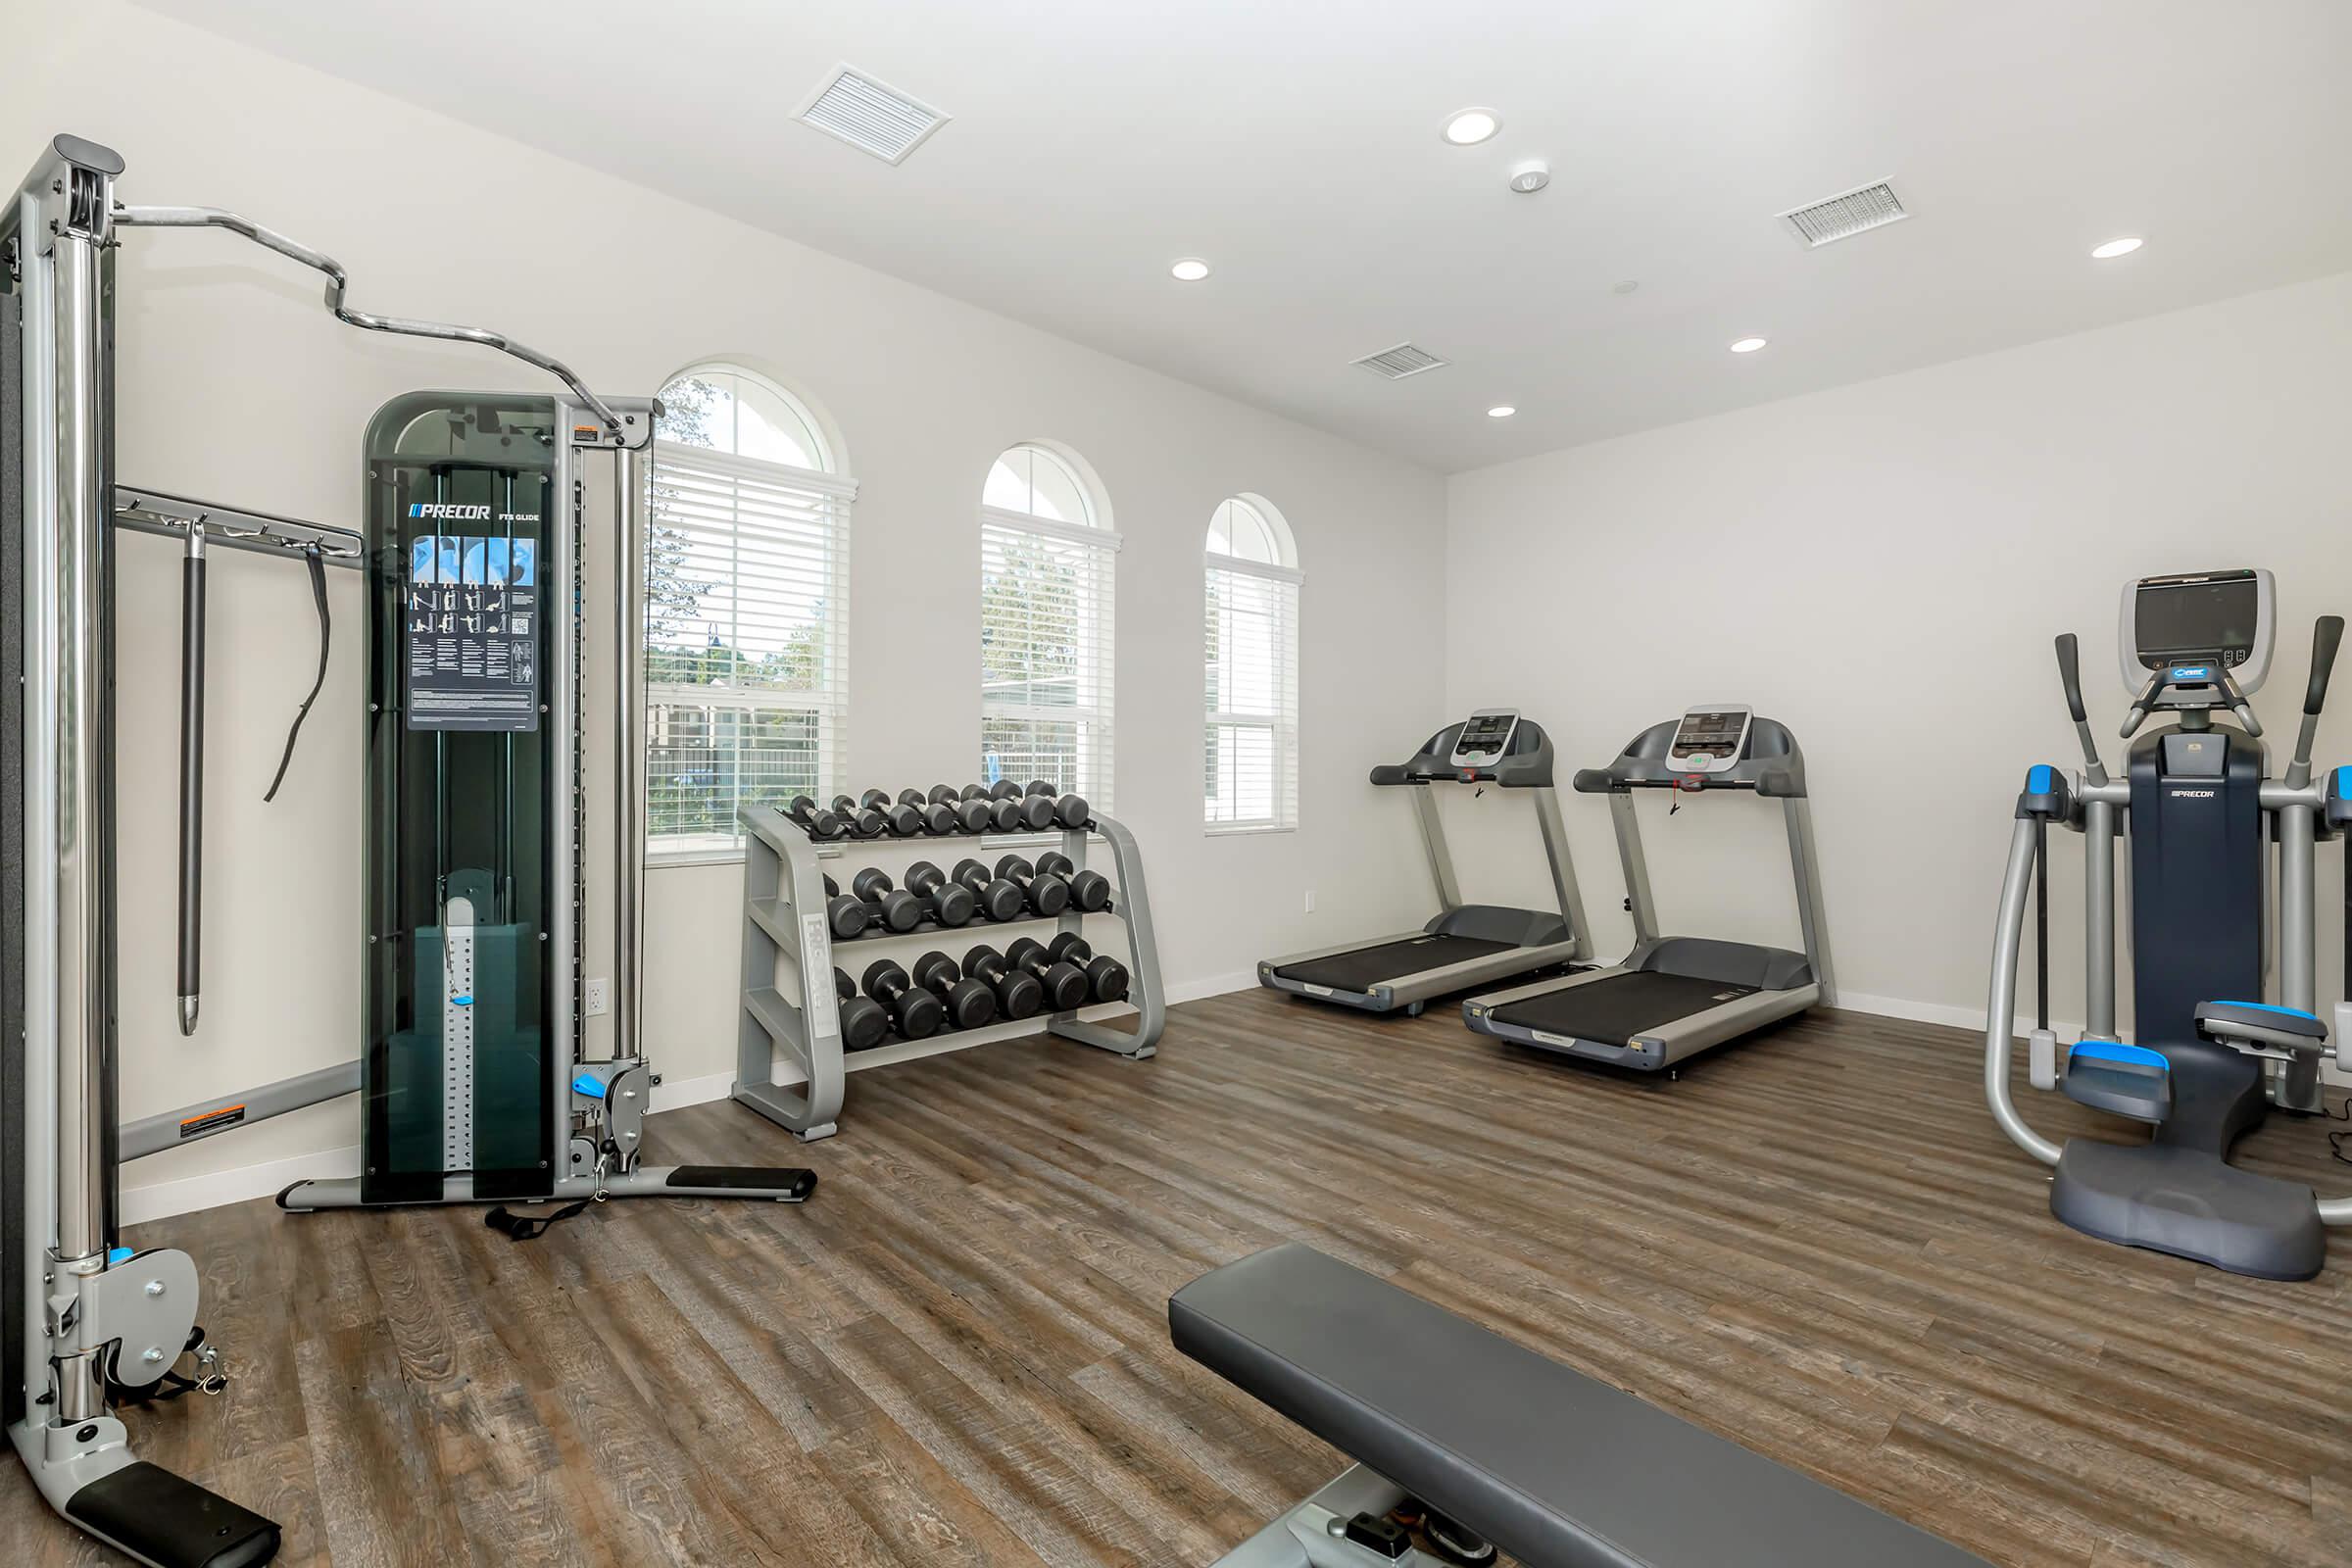 STAY FIT AT THE STATE-OF-THE-ART FITNESS CENTER